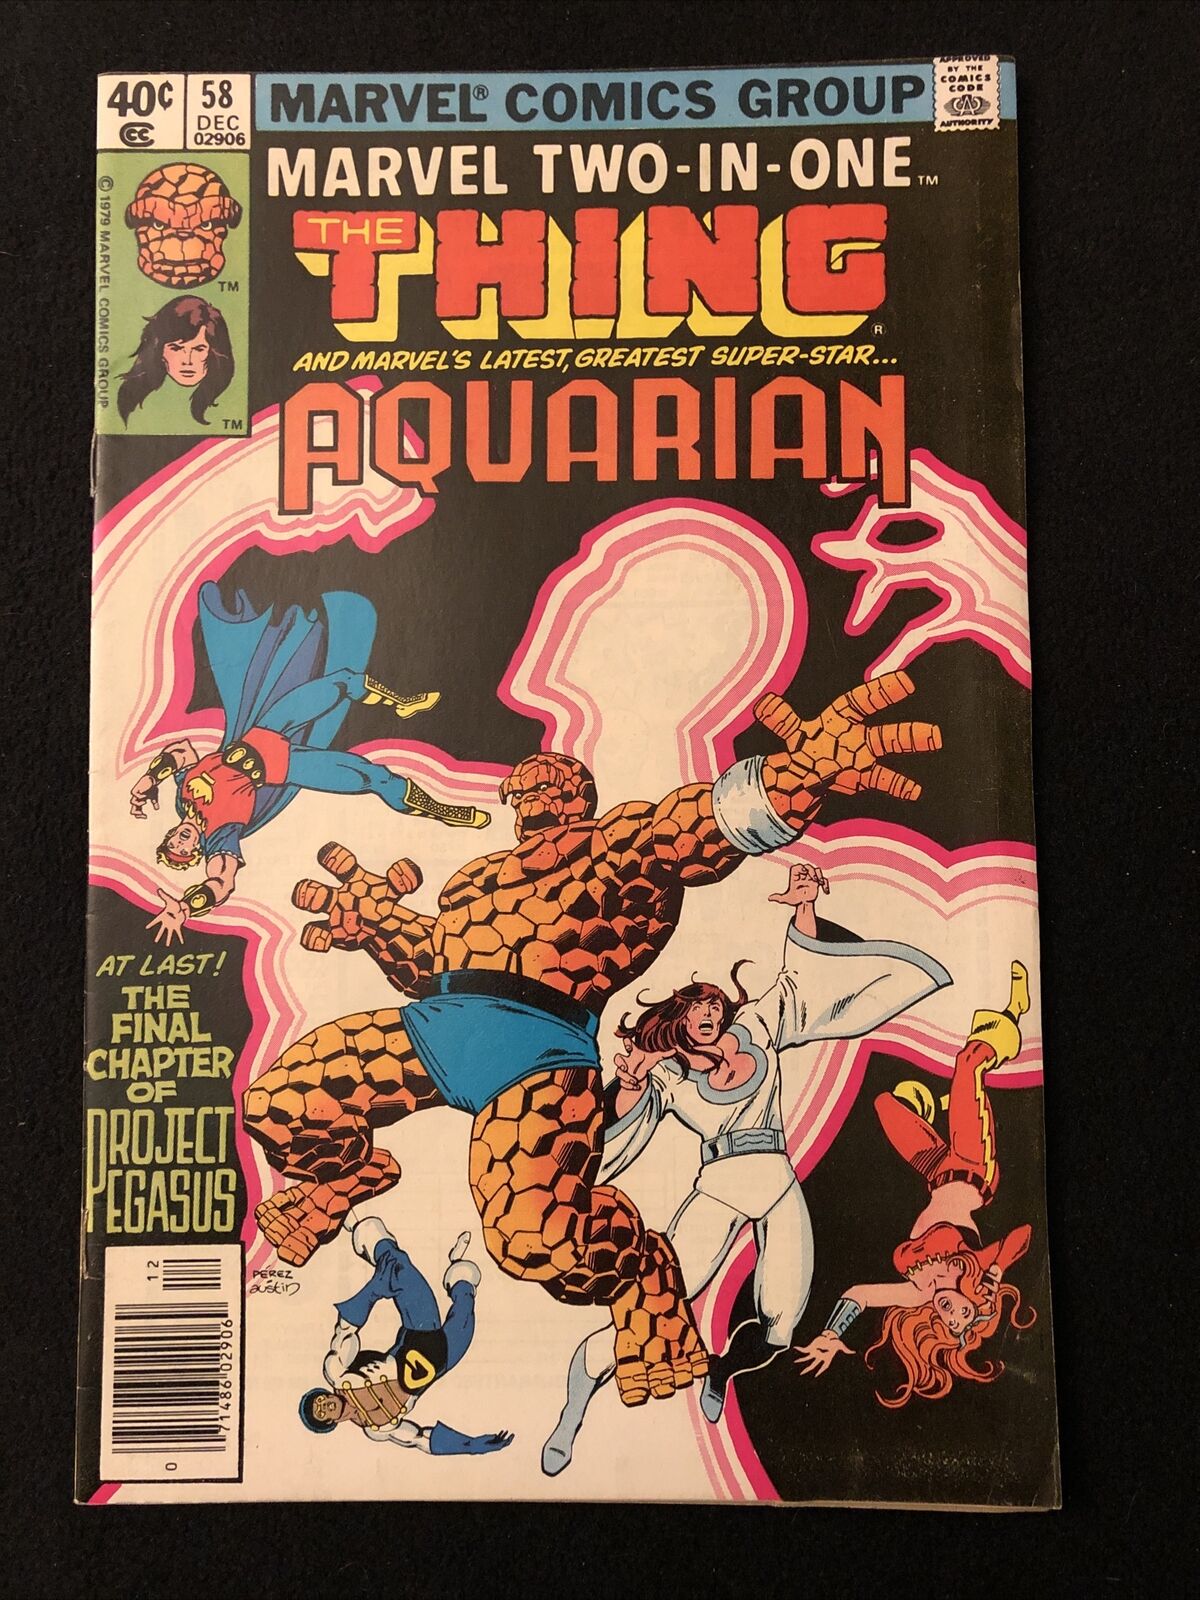 MARVEL TWO IN ONE 58 7.0 MARVEL 1979 AQUARIAN BD